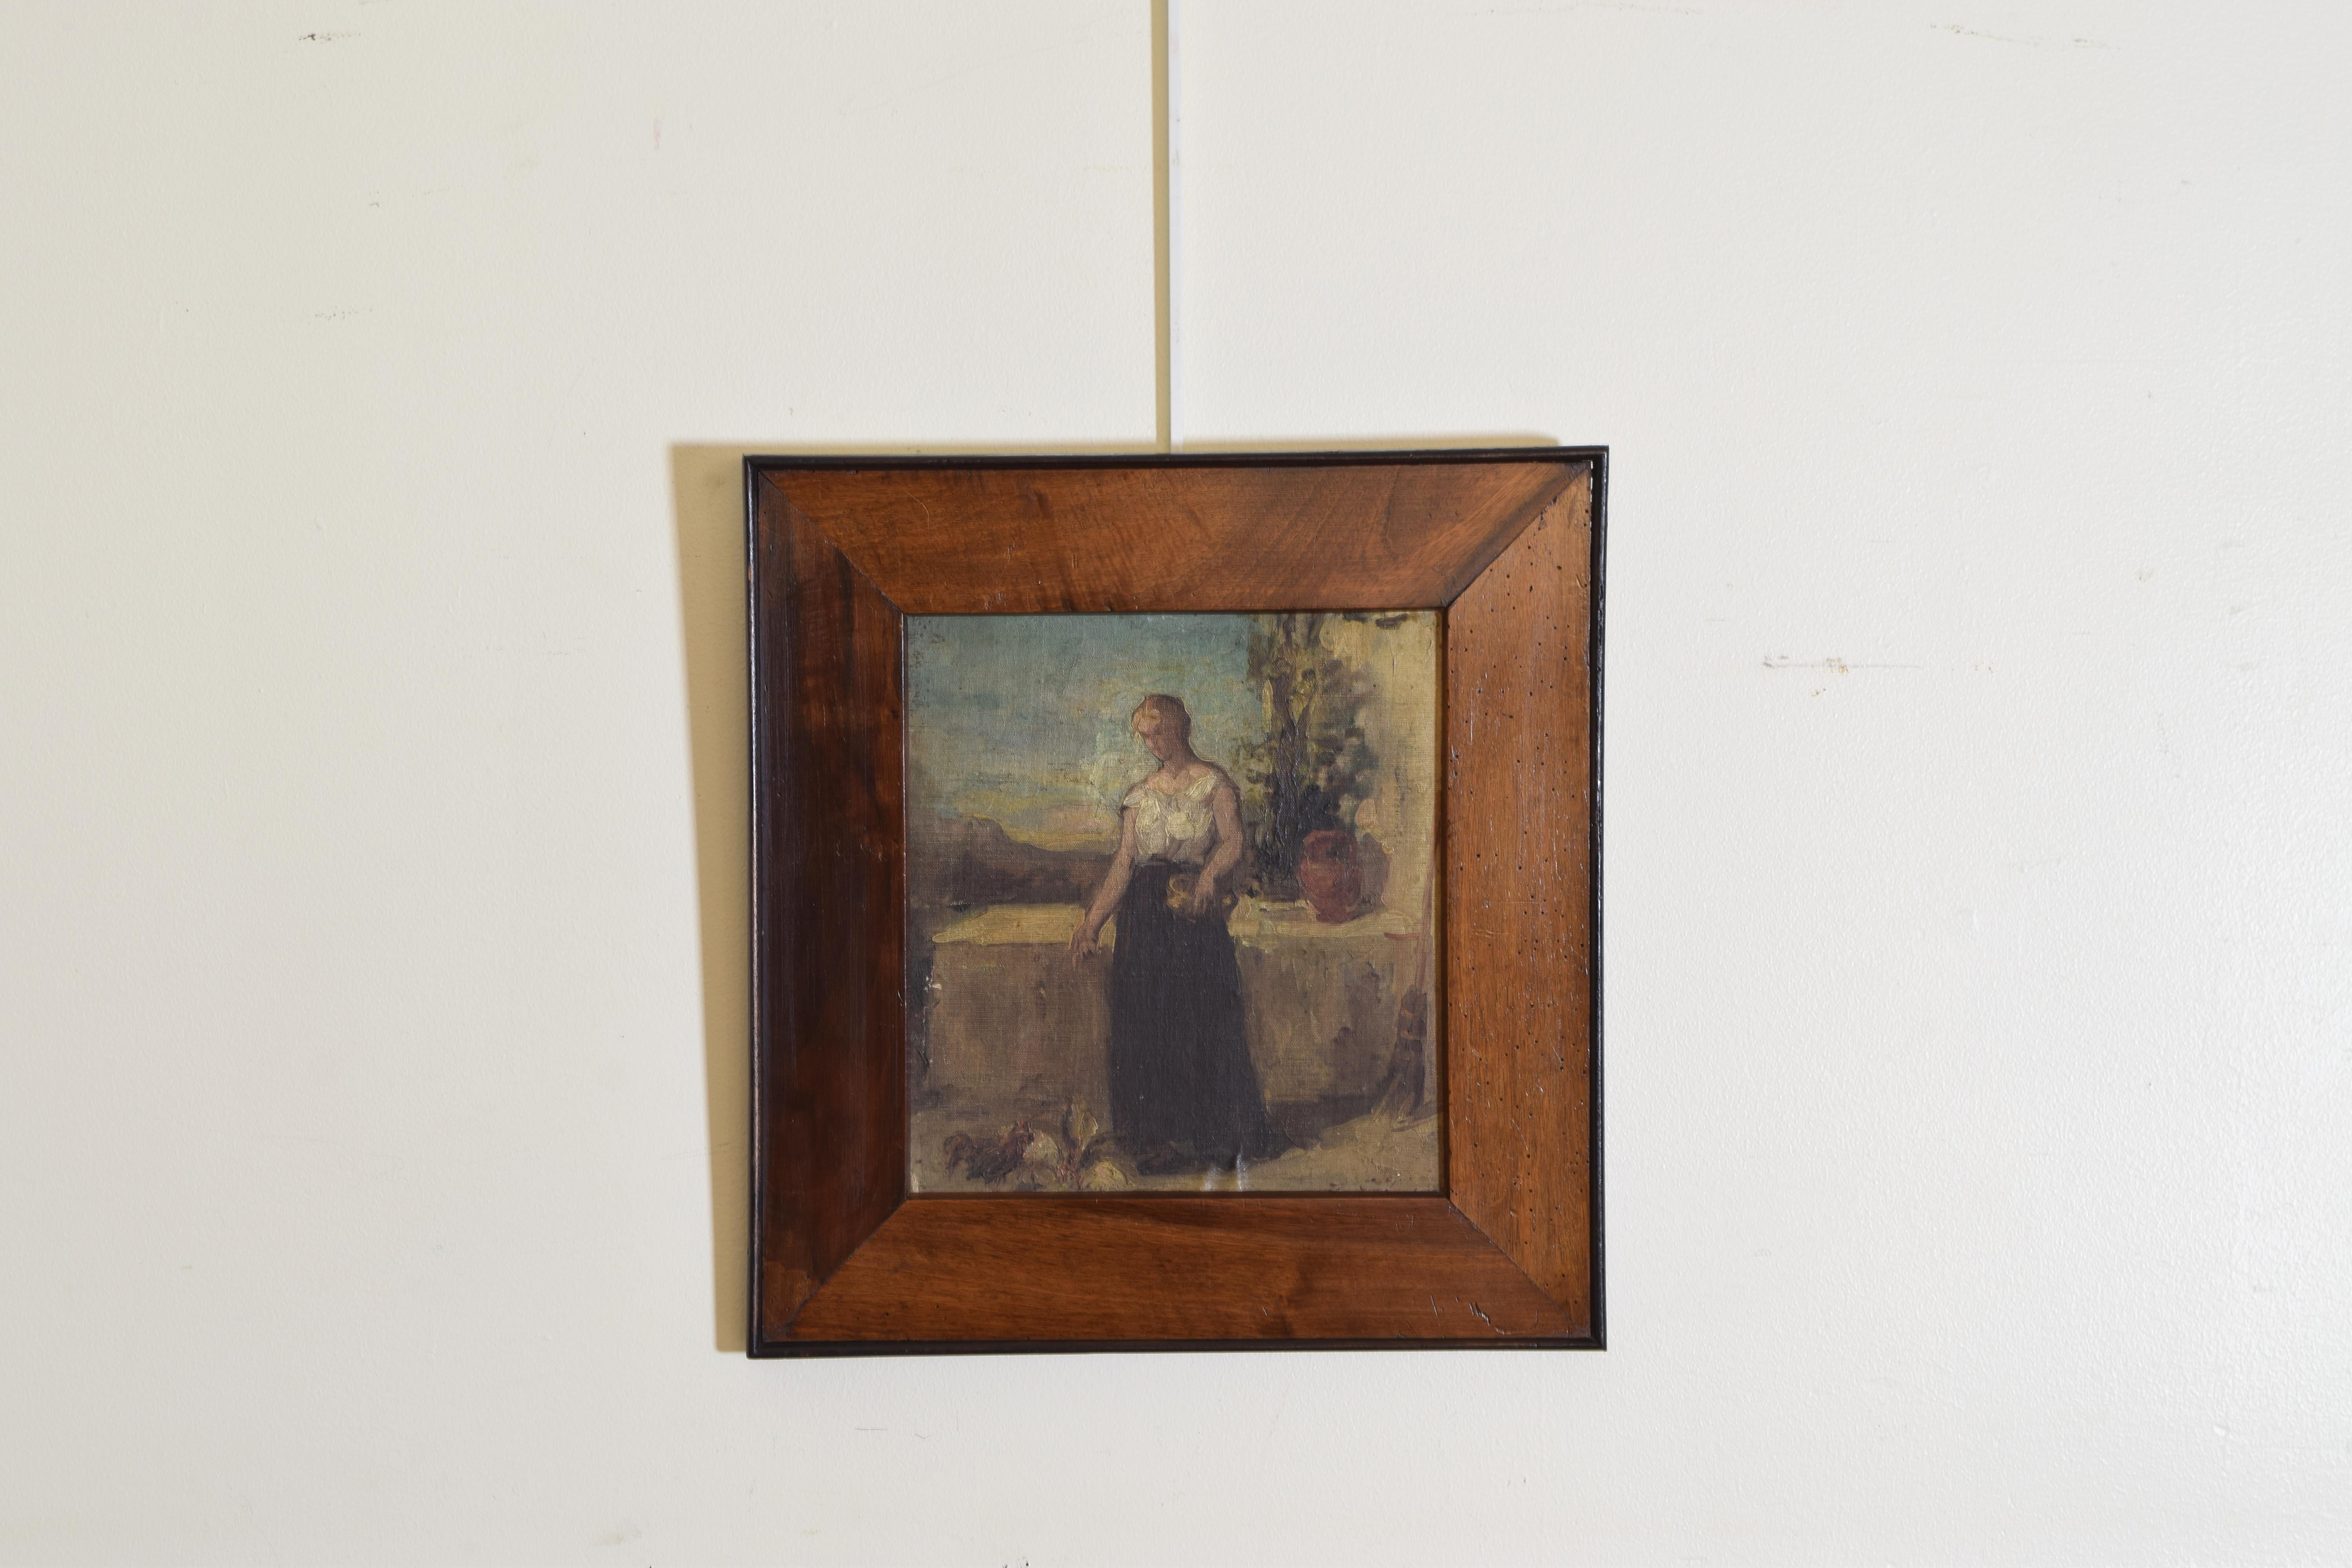 Depicting a woman with a basket feeding chicken within a walled courtyard, framed in a period walnut frame with ebonized molding.